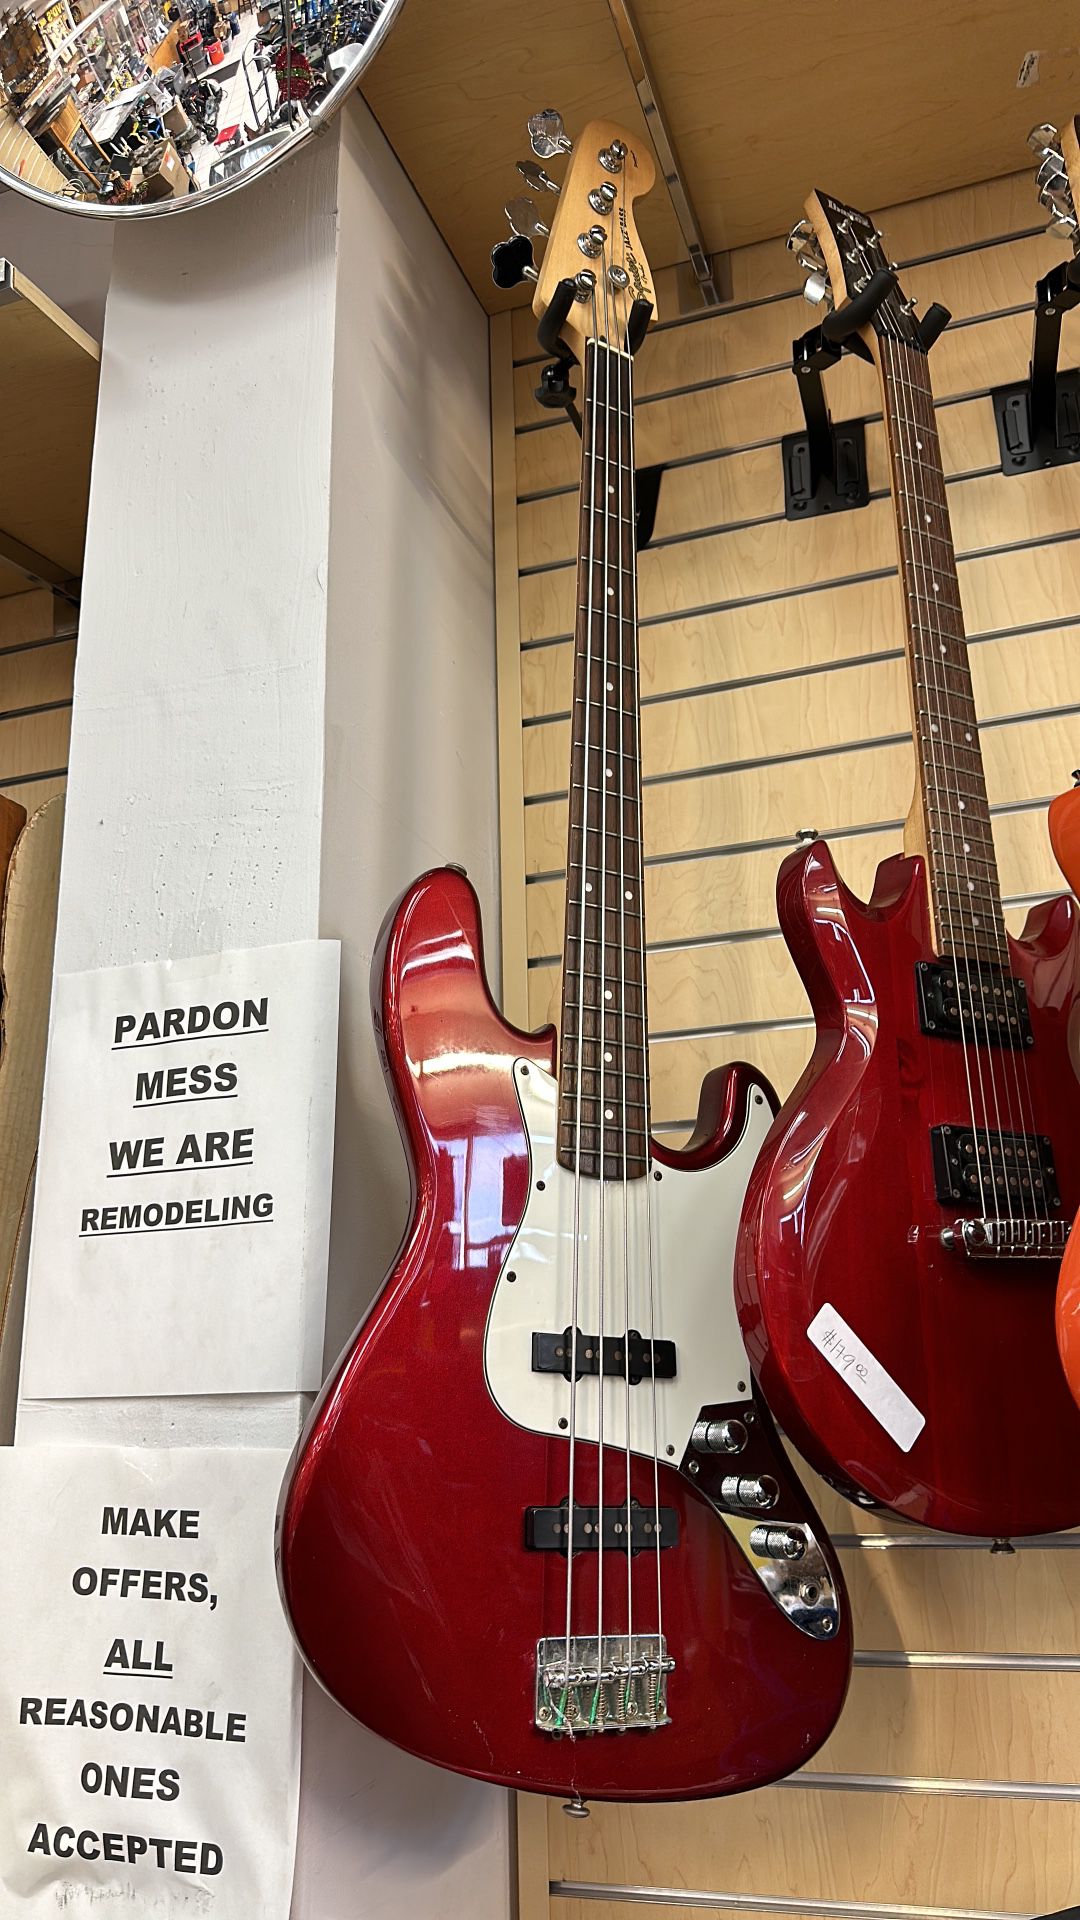 FENDER Squier Jazz Bass 4-string Electric Bass Guitar with Agathis Body, Maple Neck, Rosewood Fingerboard, and Two Single-coil Pickups Candy Apple Red